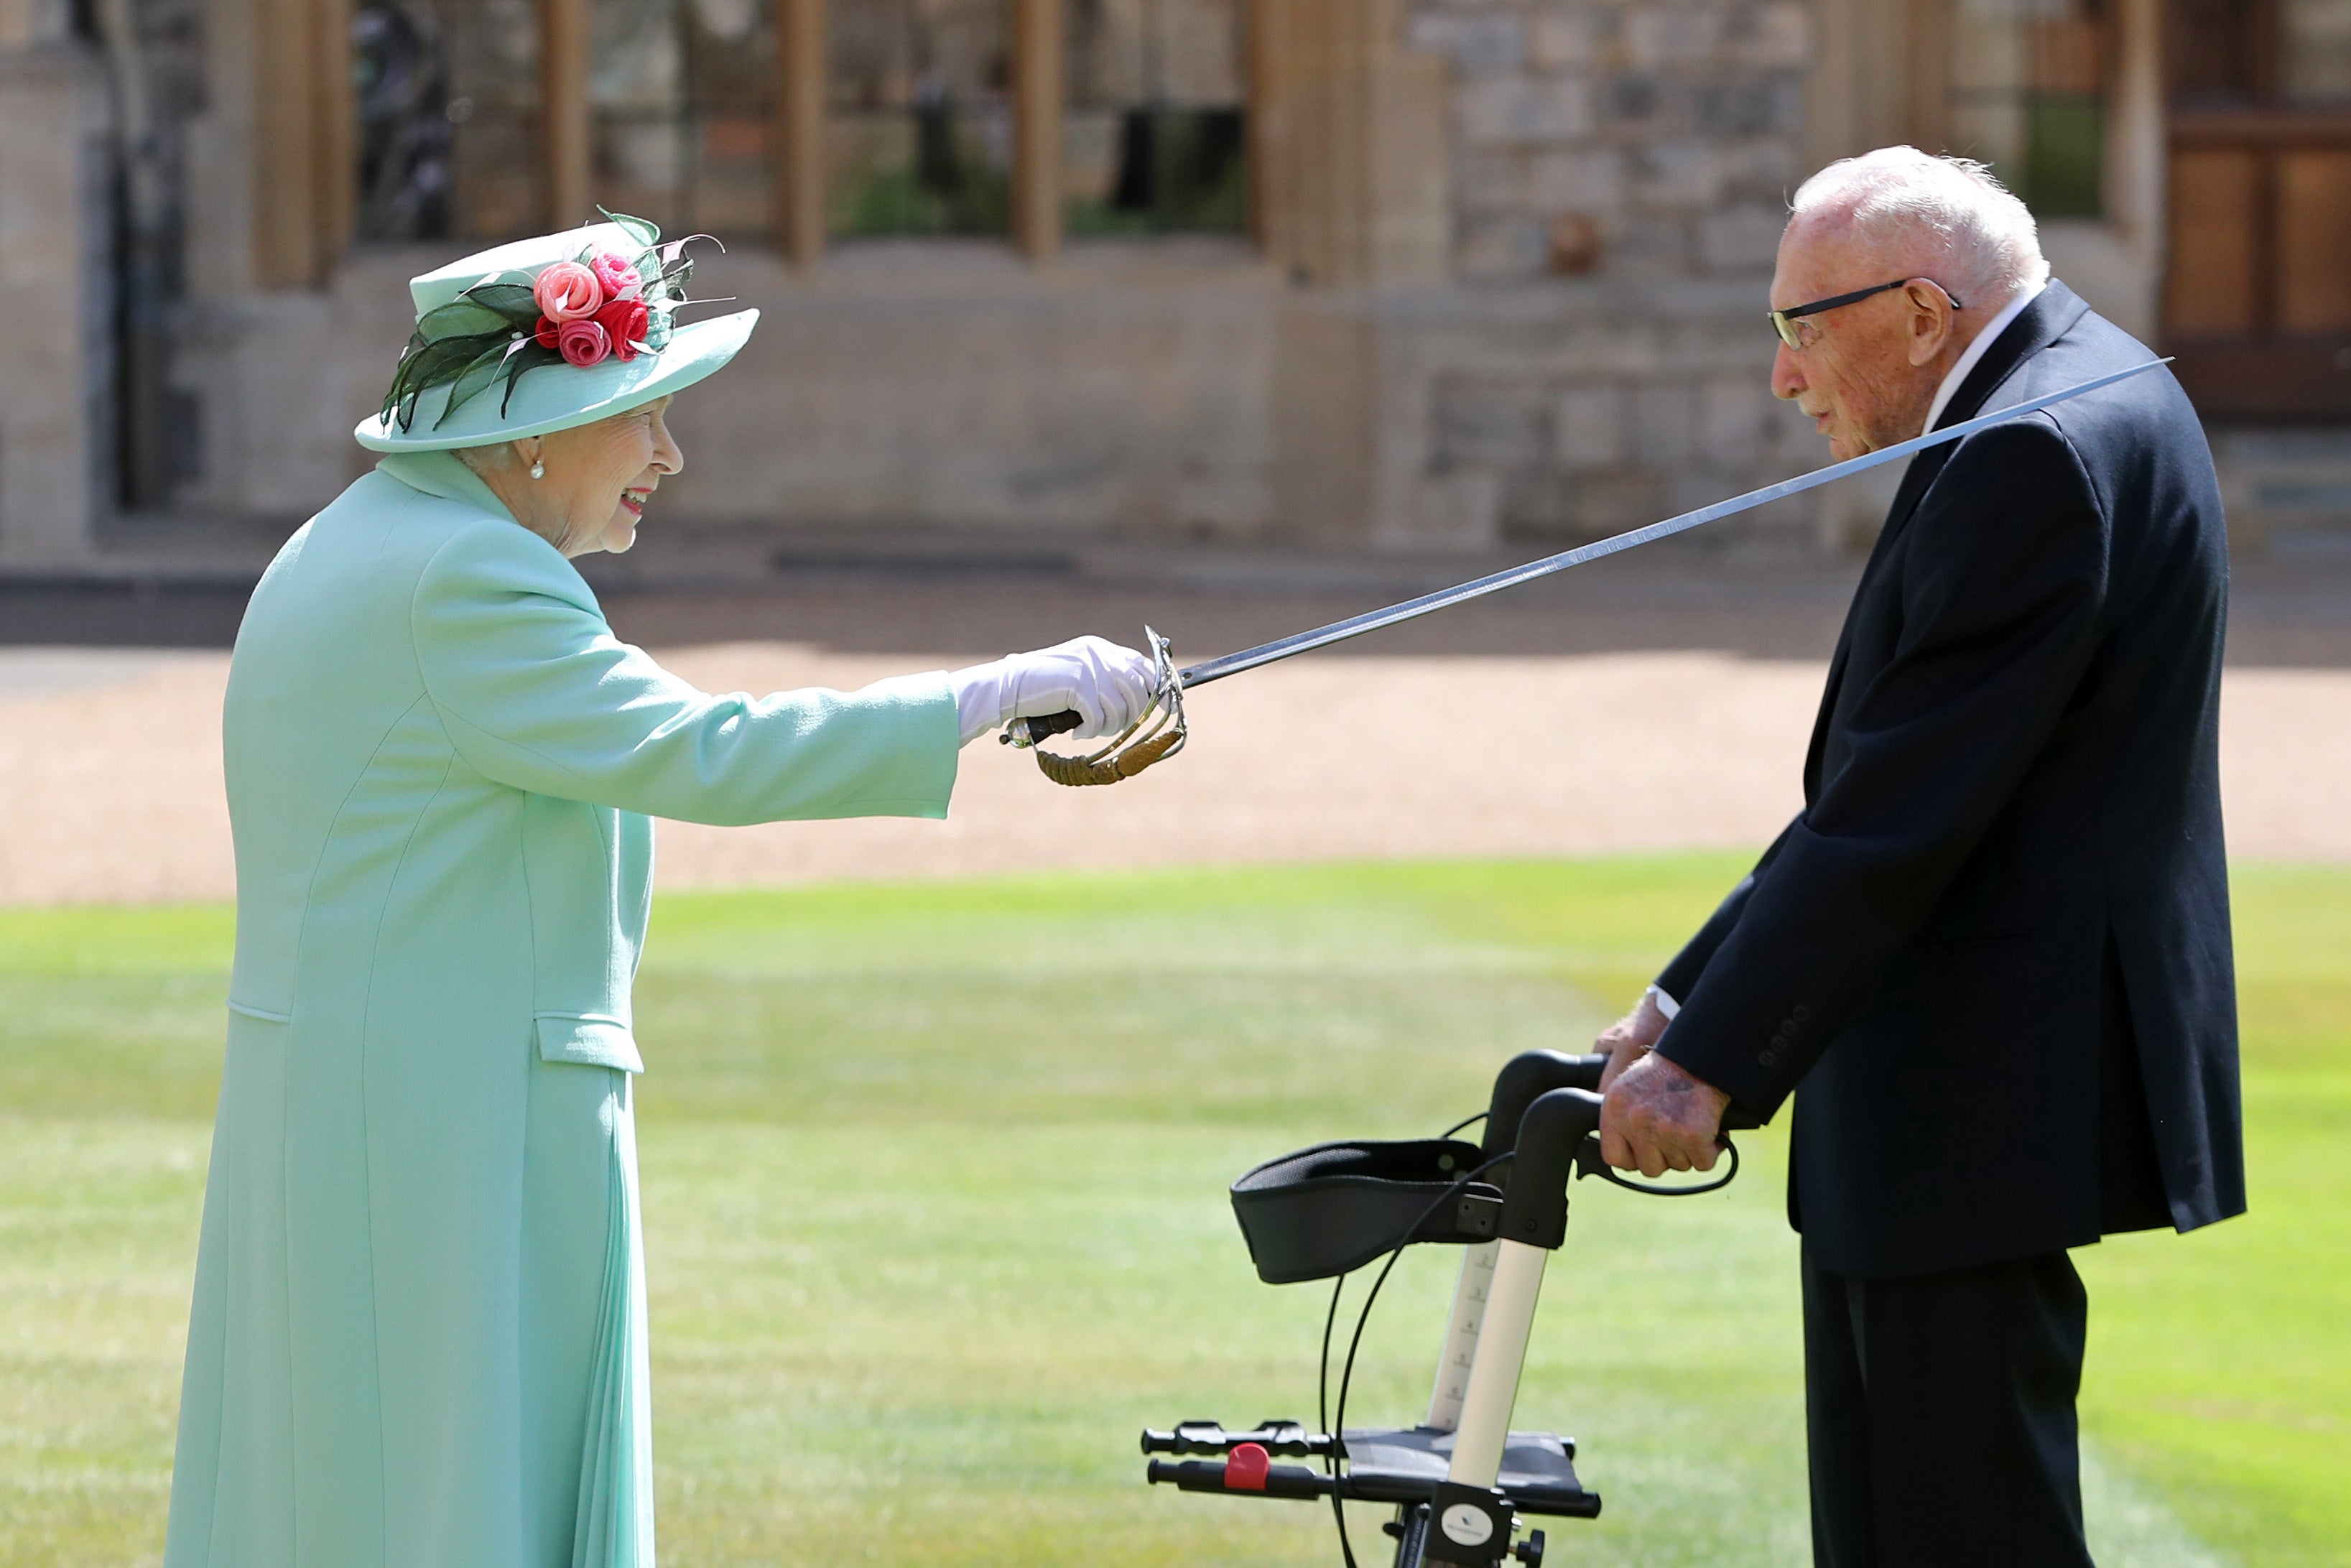 Captain Tom receiving his knighthood from Queen Elizabeth II during a ceremony at Windsor Castle in July 2020